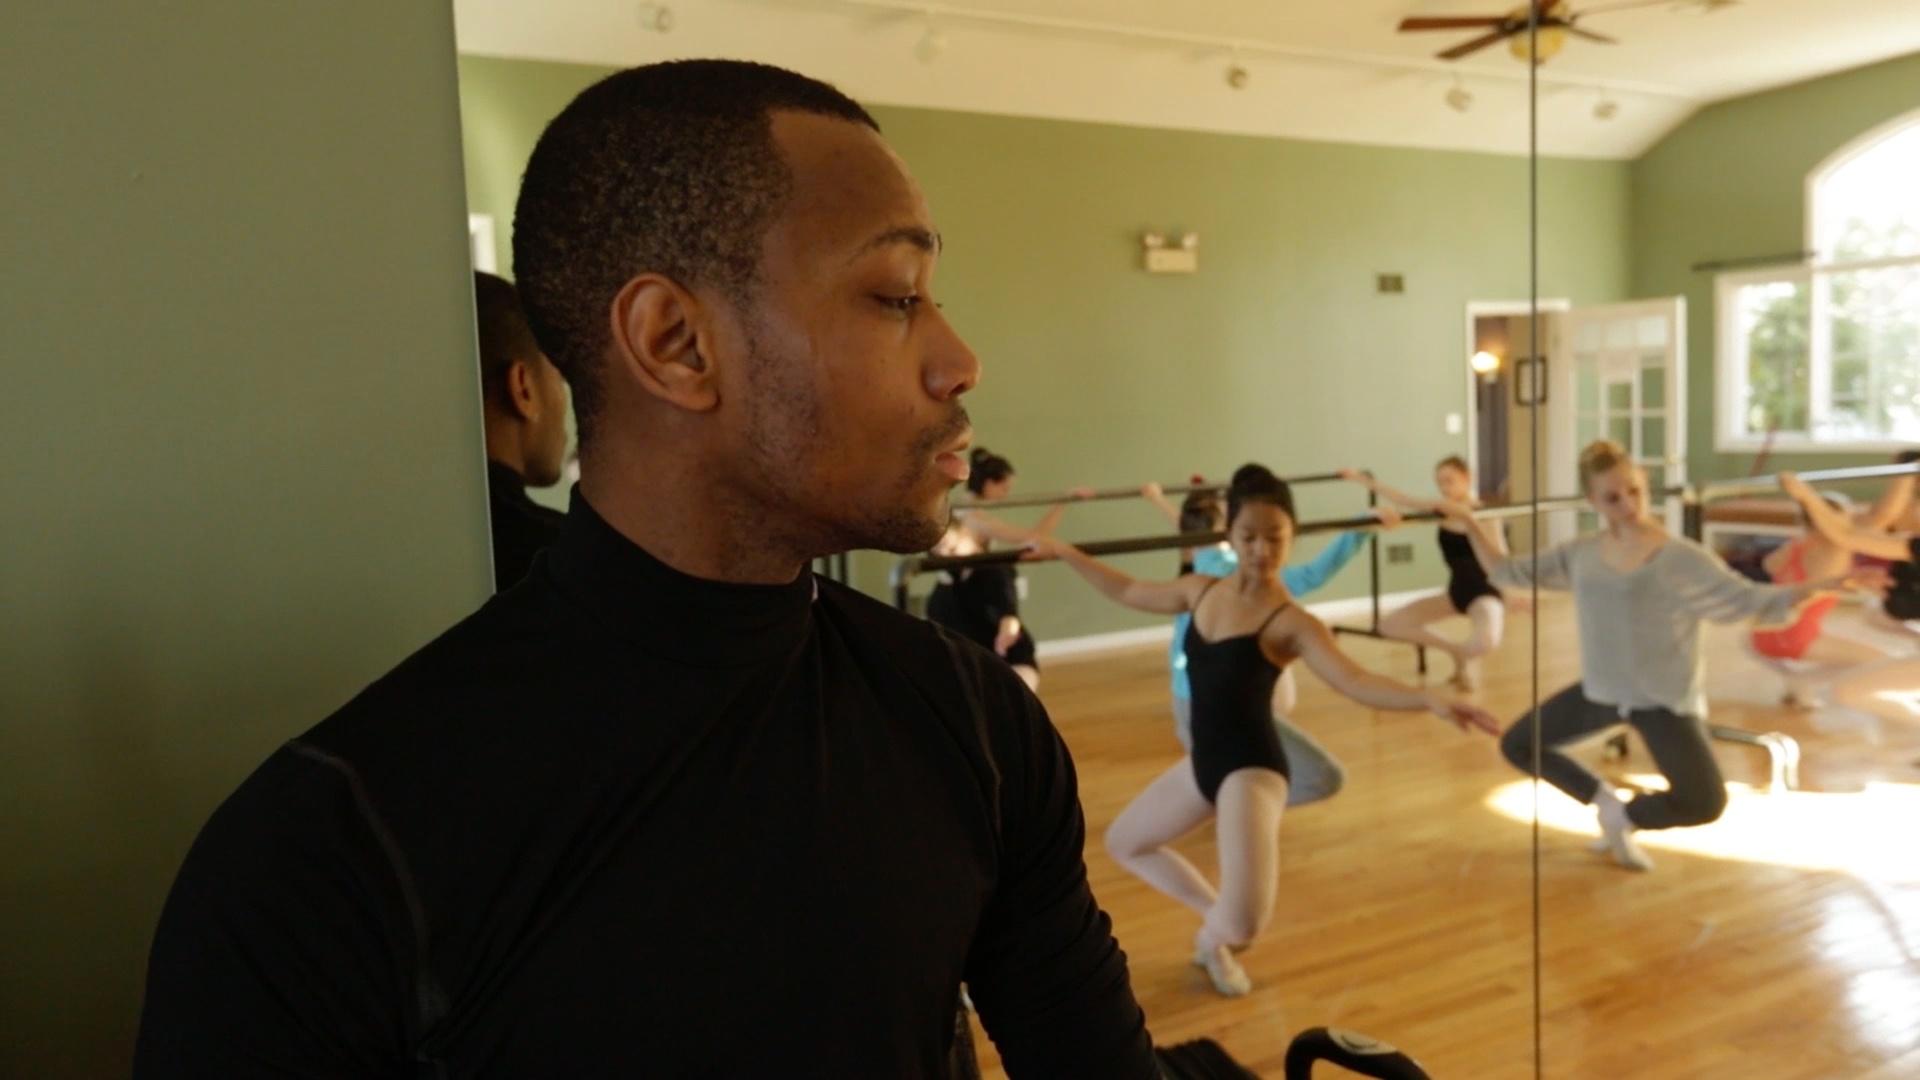 Fredrick Davis observes young ballet students at work in New Jersey, where he instructs a class.